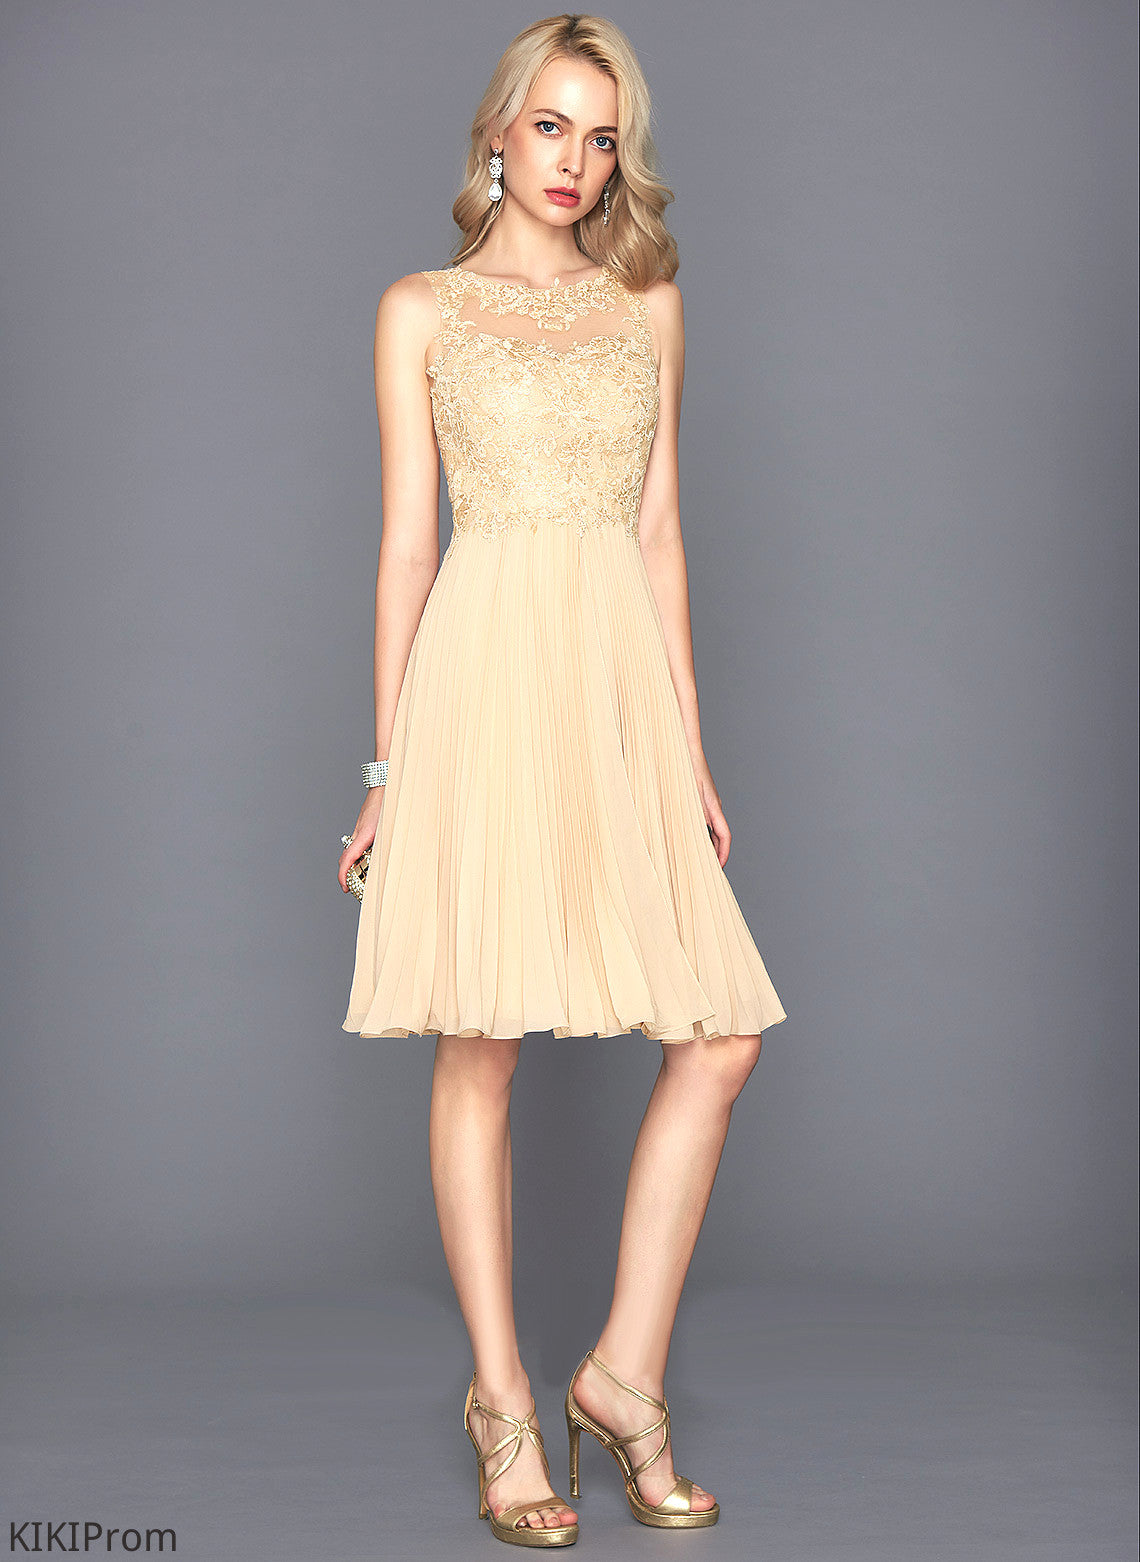 Pleated Scoop Chiffon Dress Cocktail Lace Neck Charlee Cocktail Dresses Knee-Length With A-Line